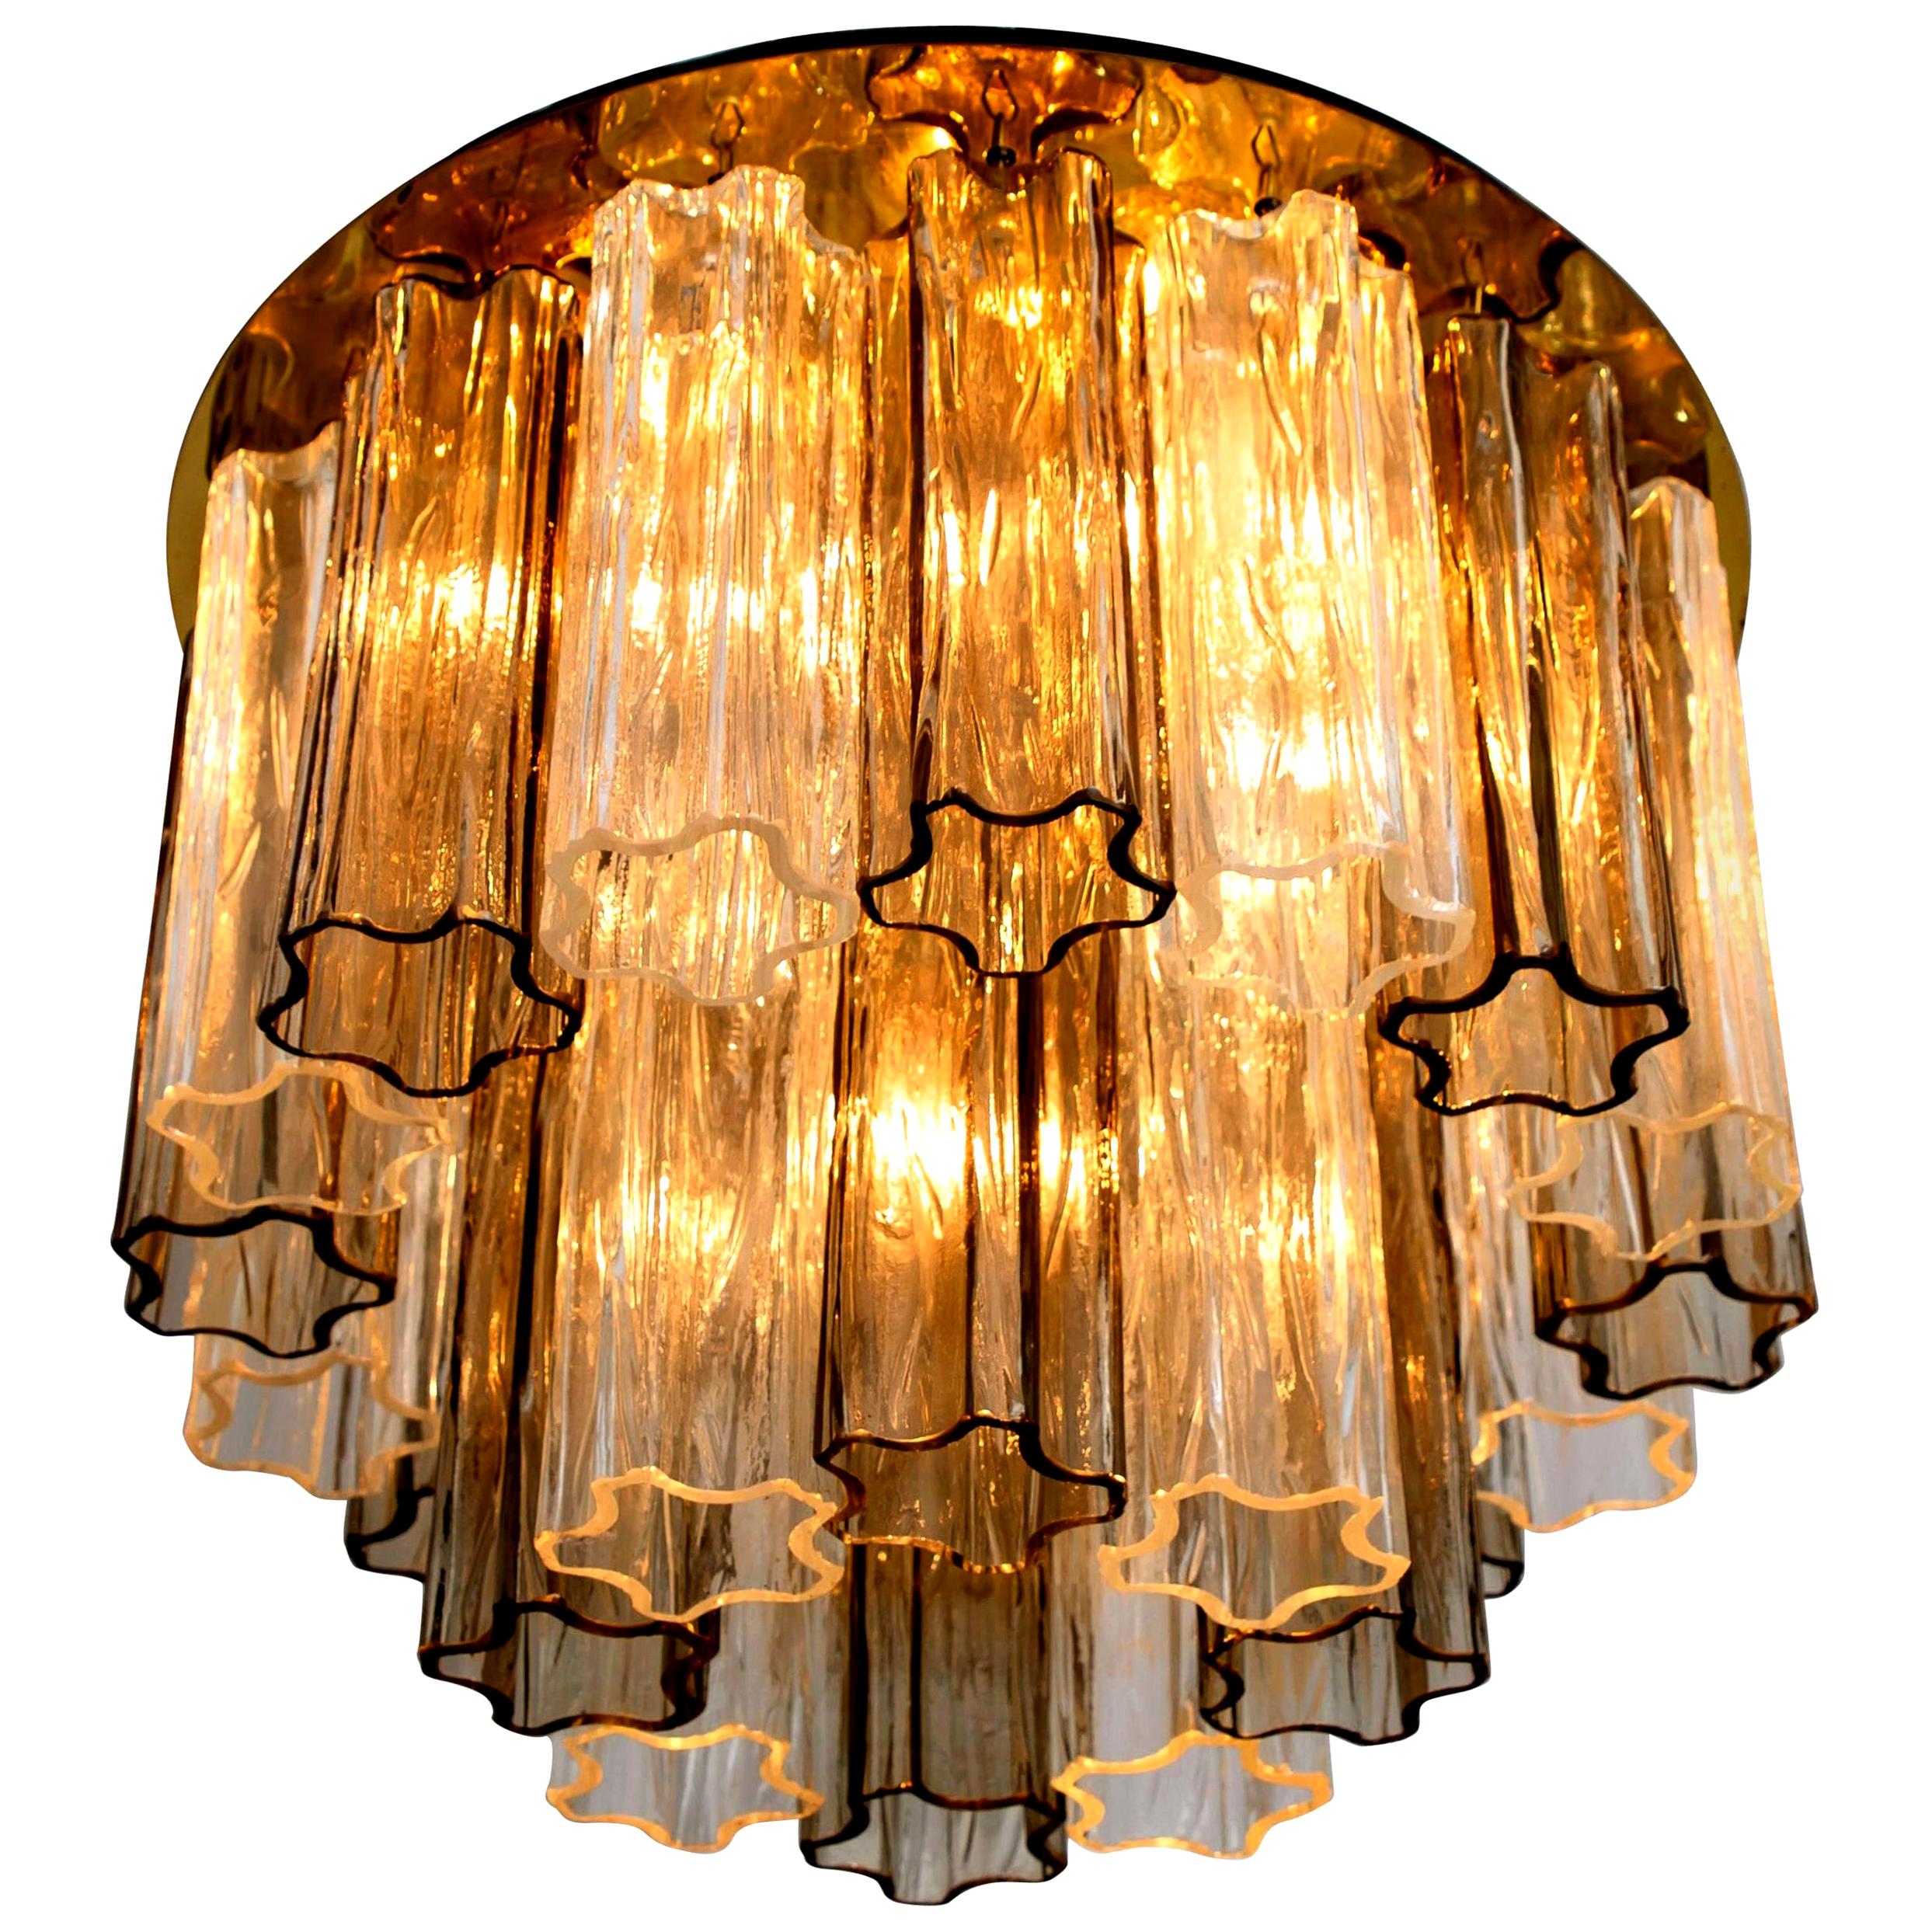 One of the two wonderful two-tier Murano glass tronchi flush mount ceiling lights designed by J.T. Kalmar for Kalmar Franken, Vienna, Austria. Manufactured in circa 1960. These chandelier is handmade and a high quality piece. Murano tubes in smoked